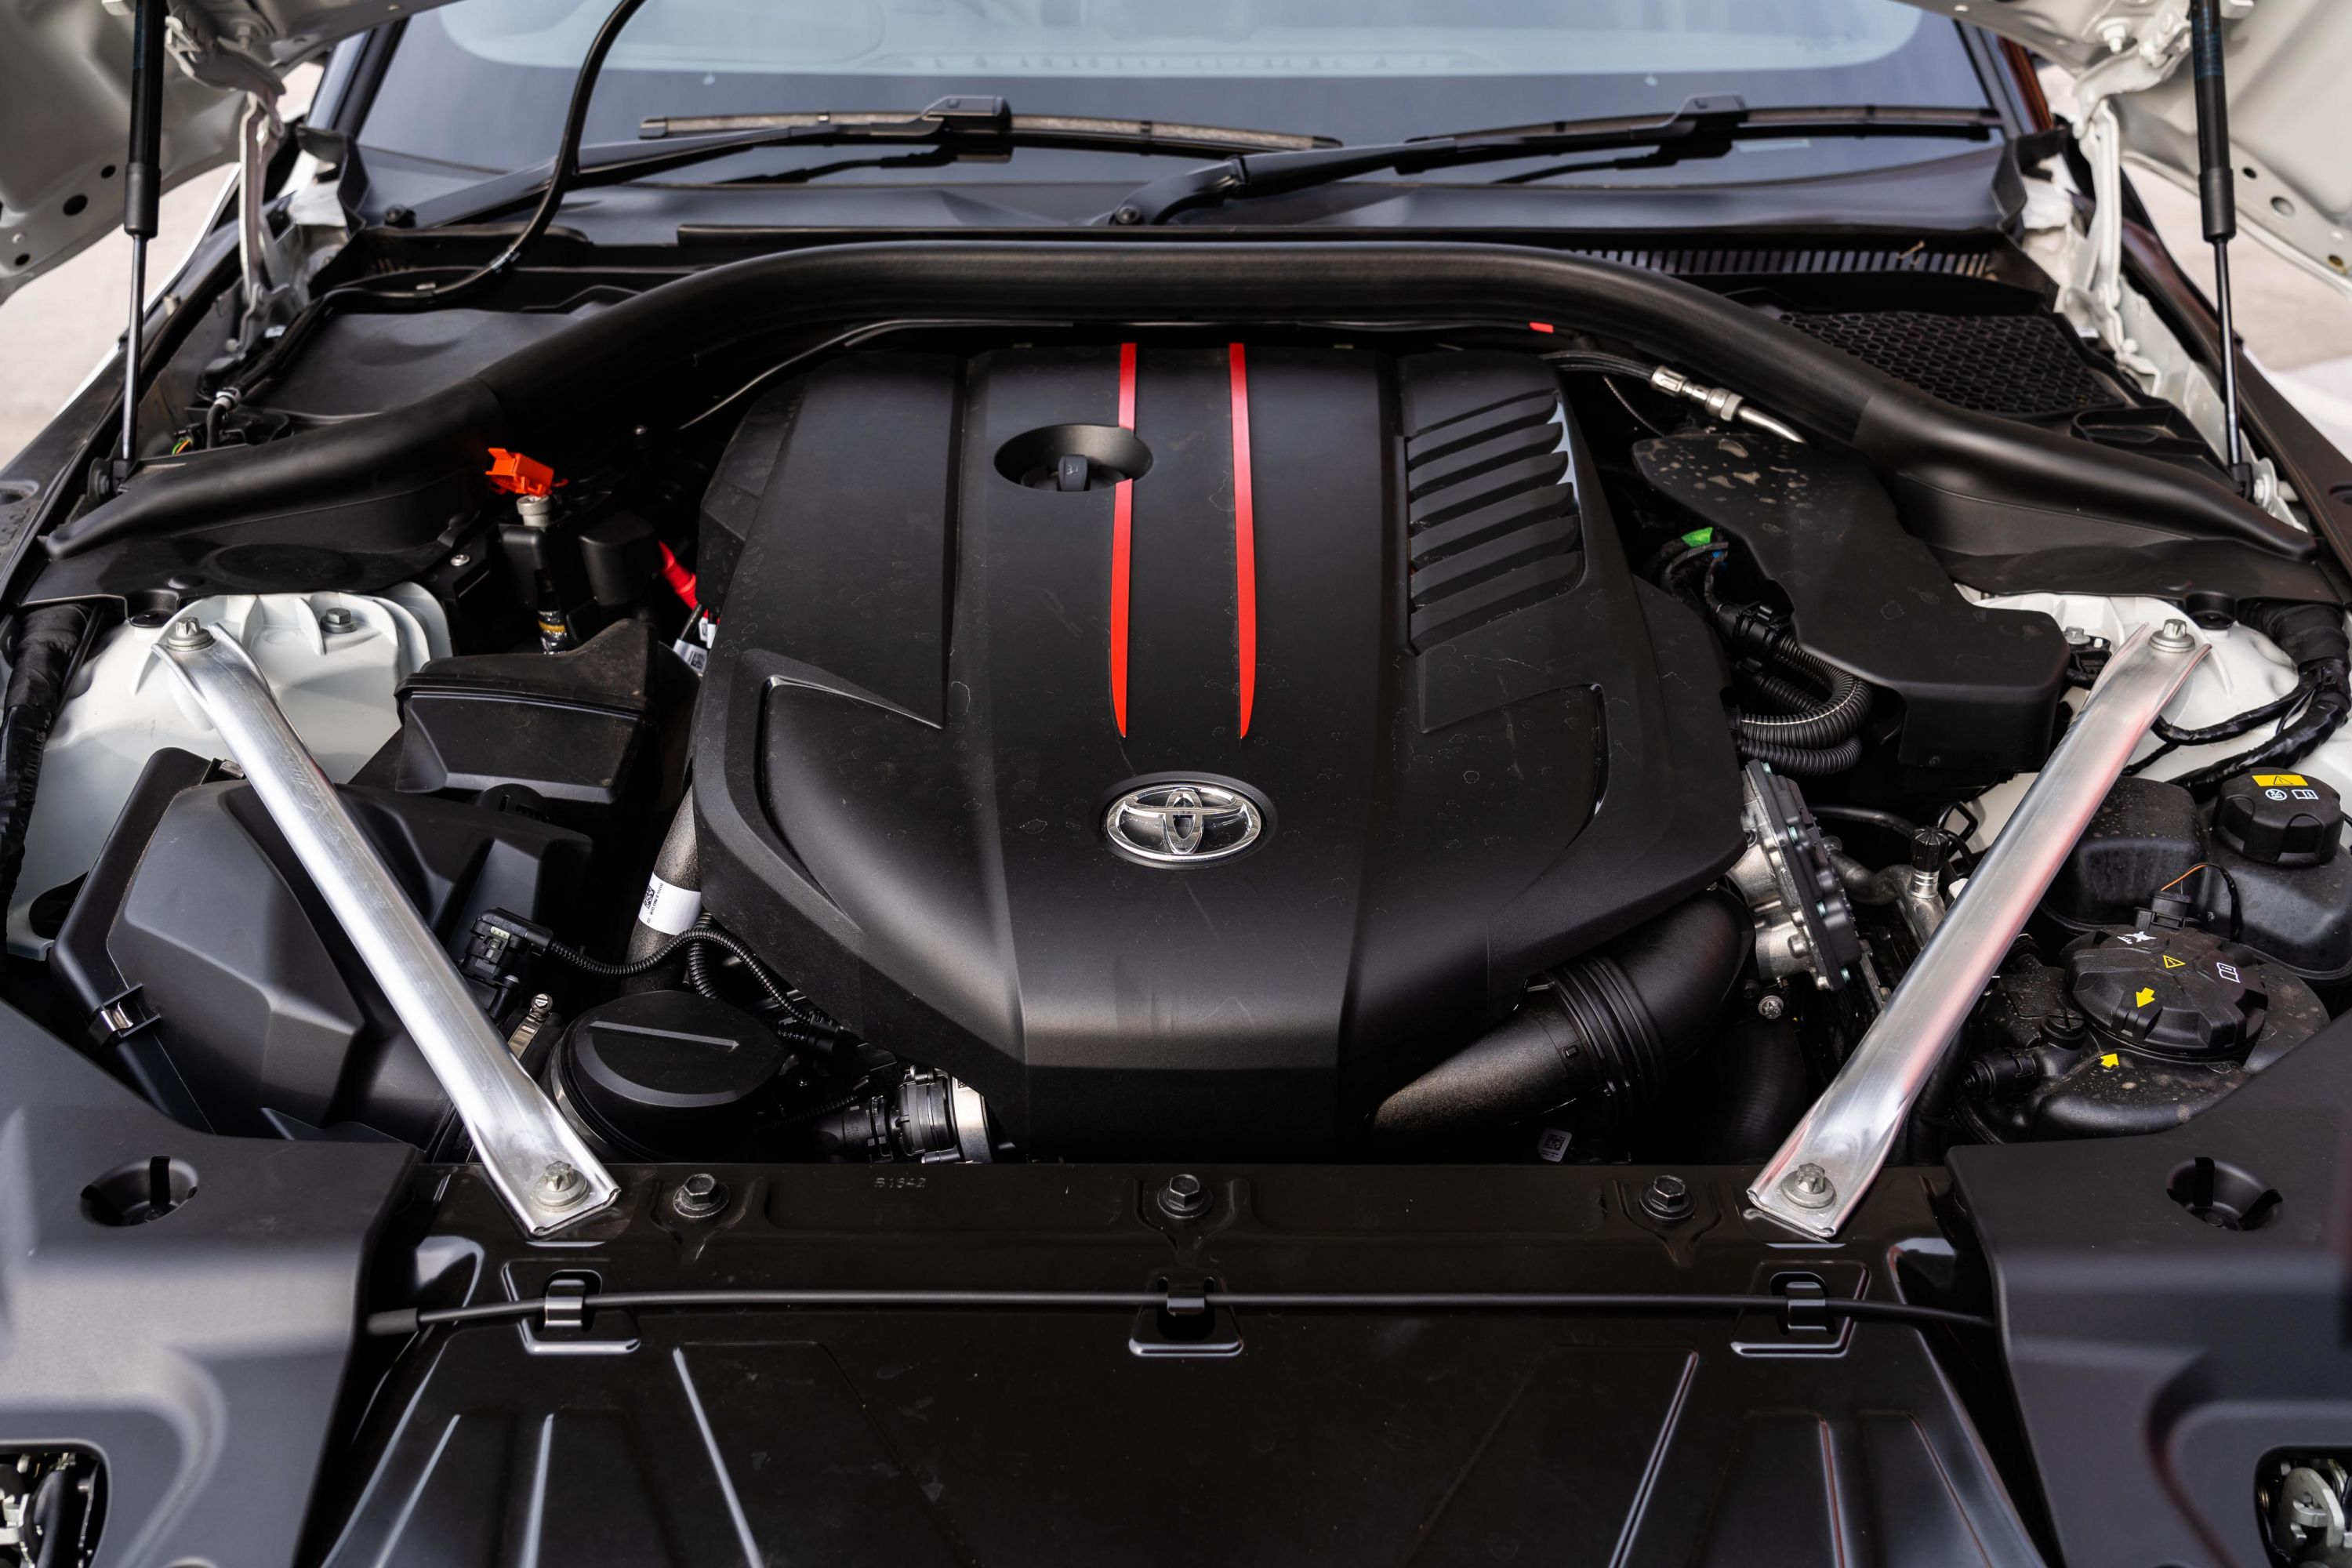 What Are The Engine Specs Of The 2023 Toyota GR Supra?